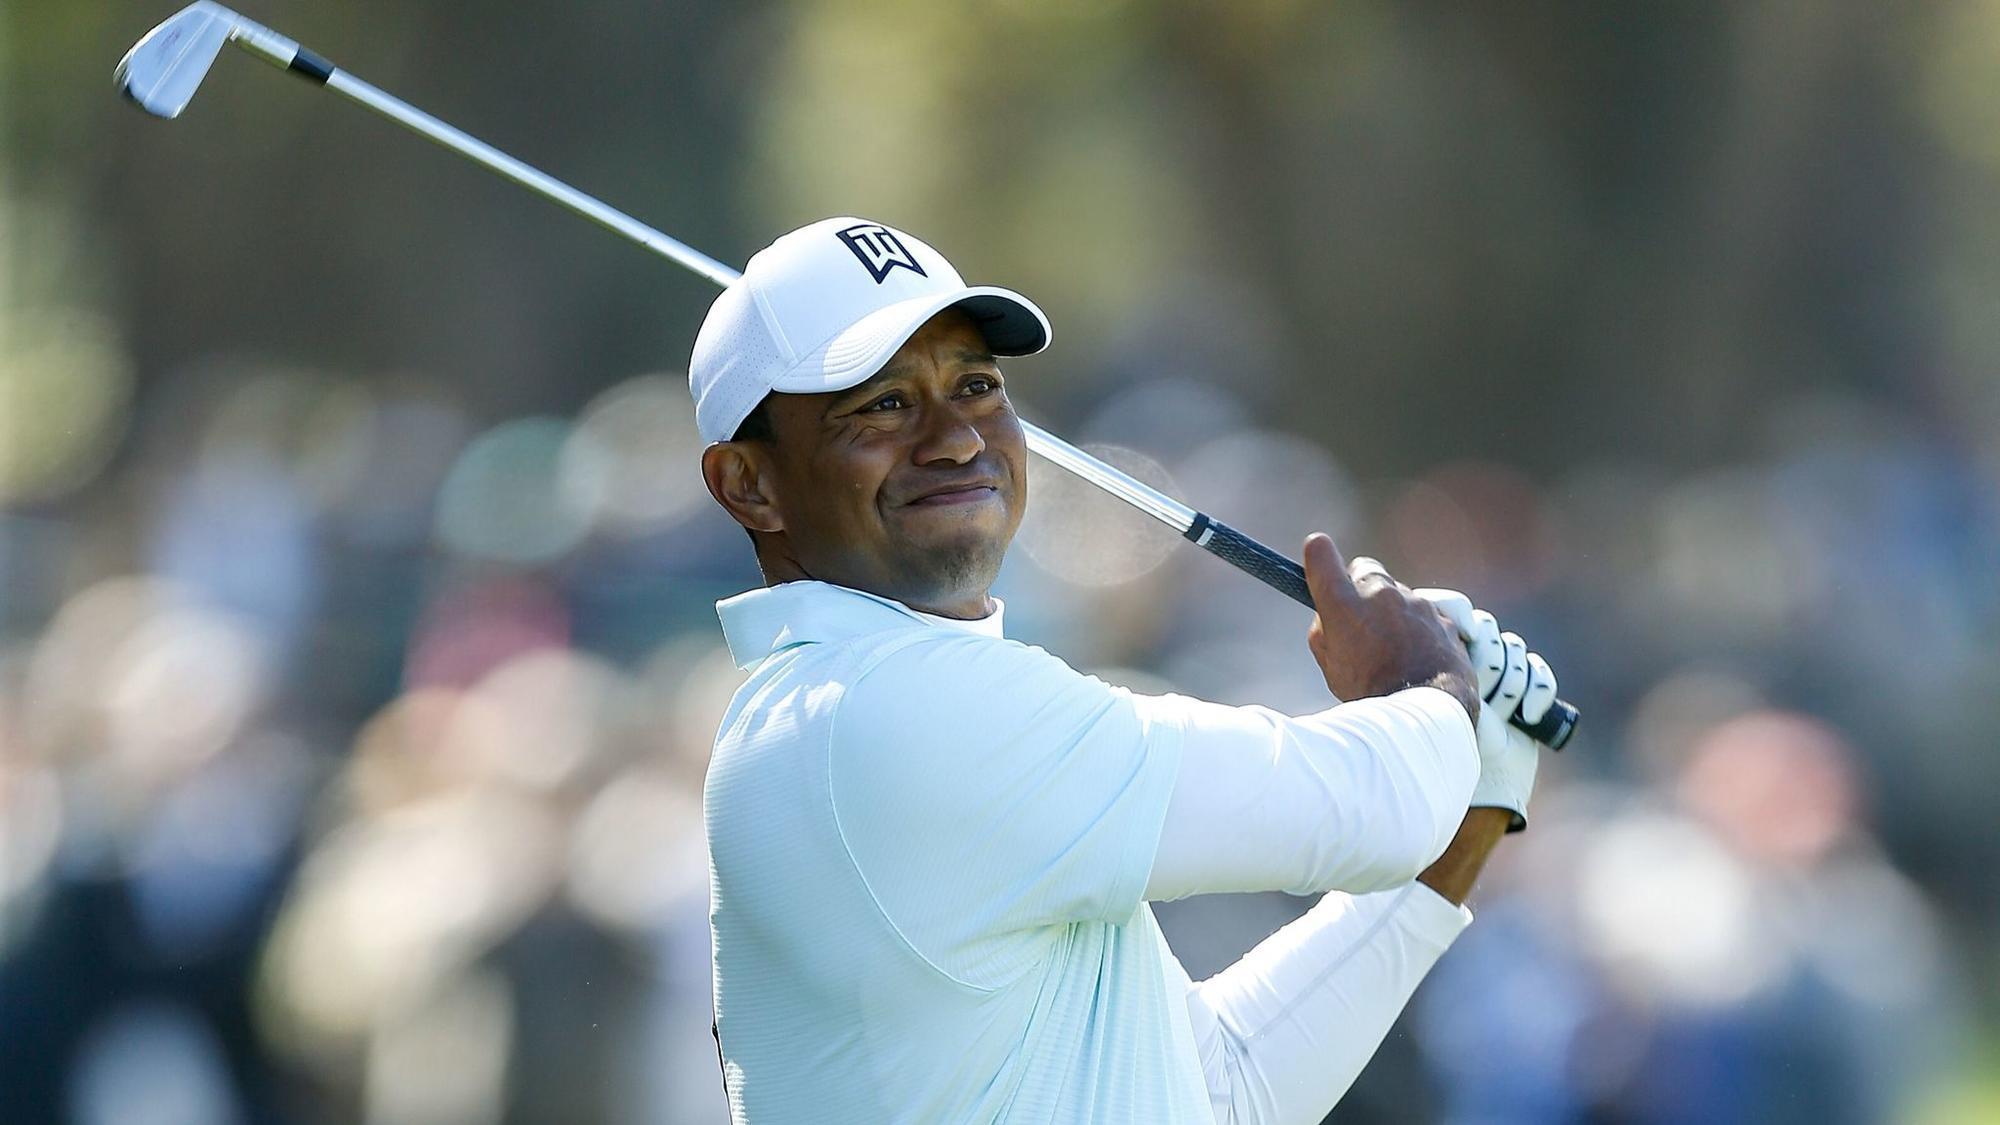 Tiger Woods surges to the top of a PGA Tour leaderboard for the first time since 2015 ...2000 x 1125